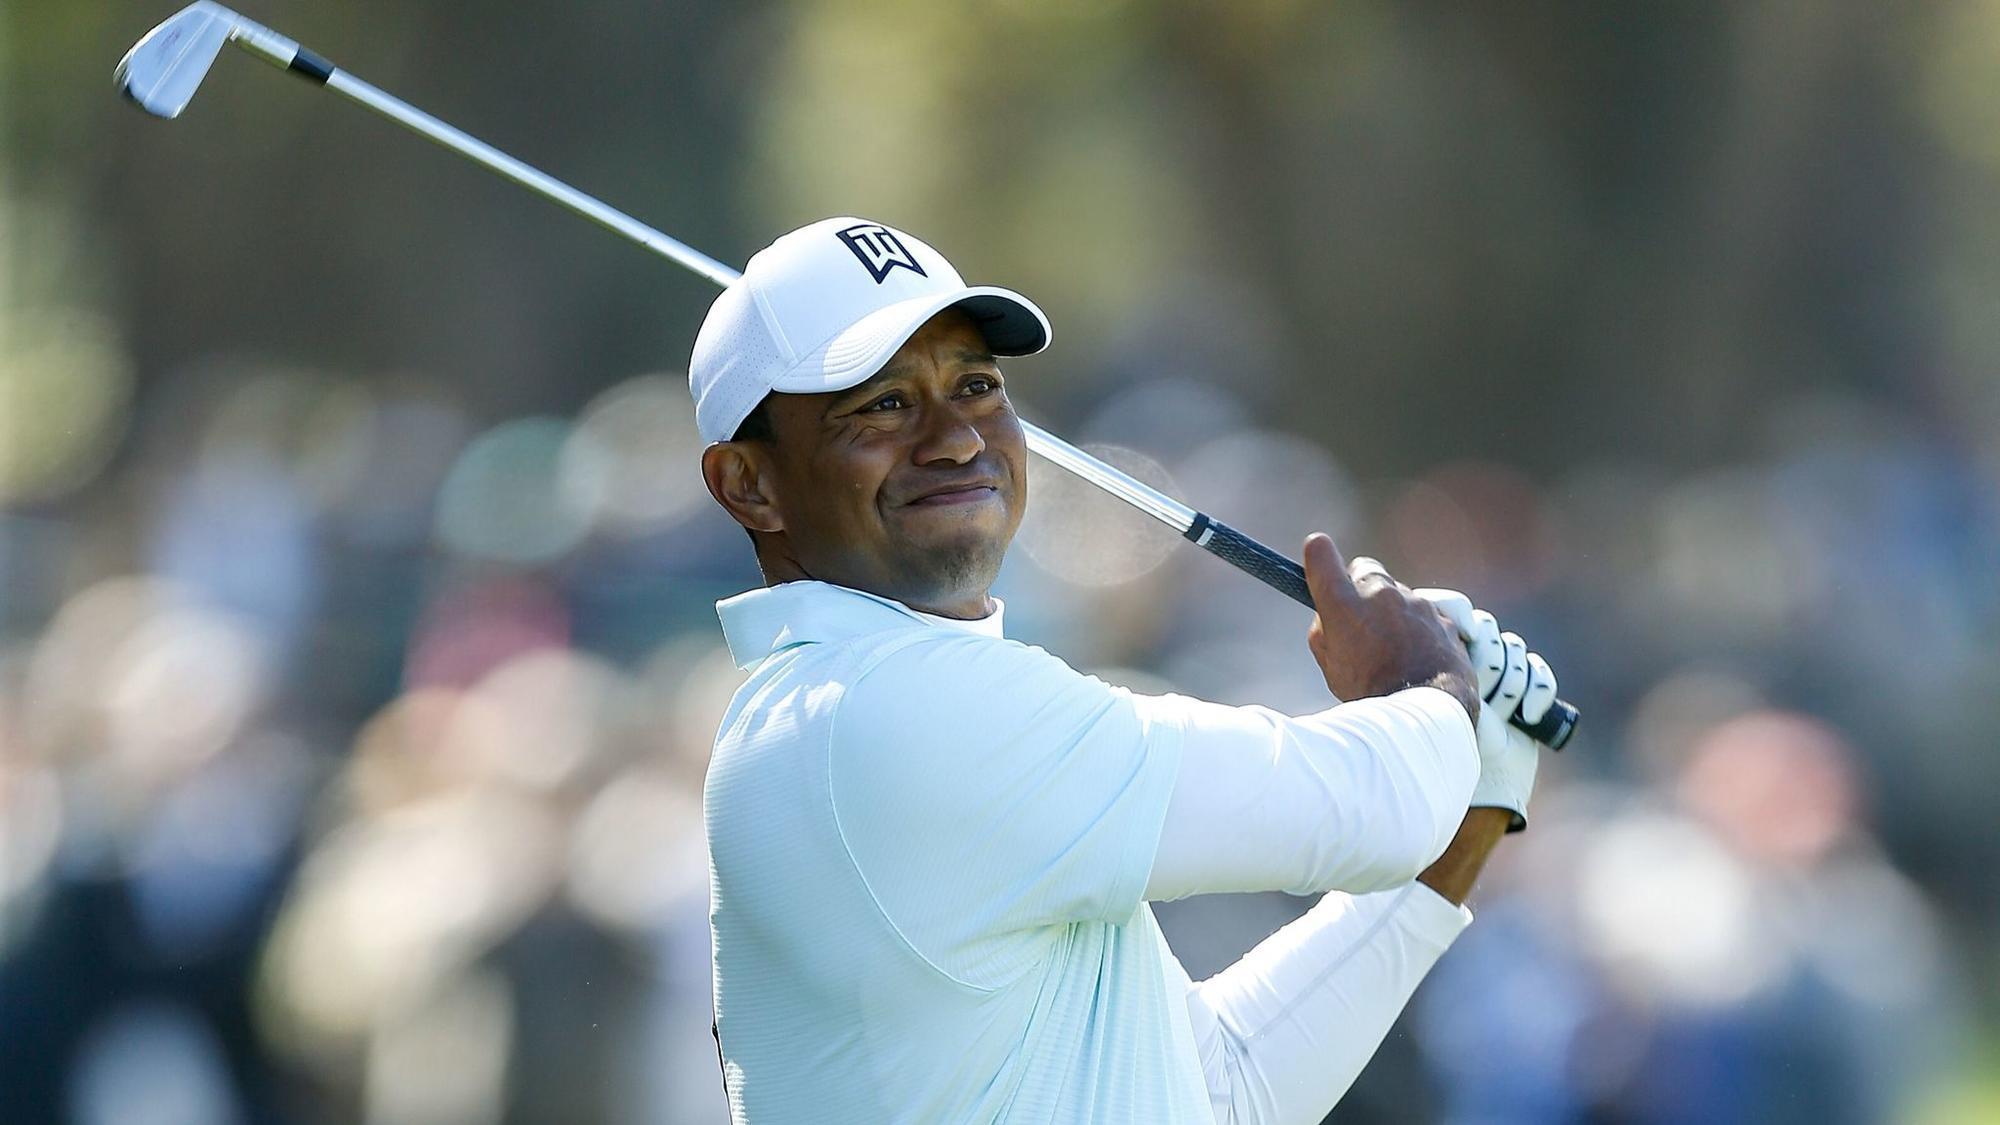 Tiger Woods surges to the top of a PGA Tour leaderboard for the first time since 2015 ...2000 x 1125